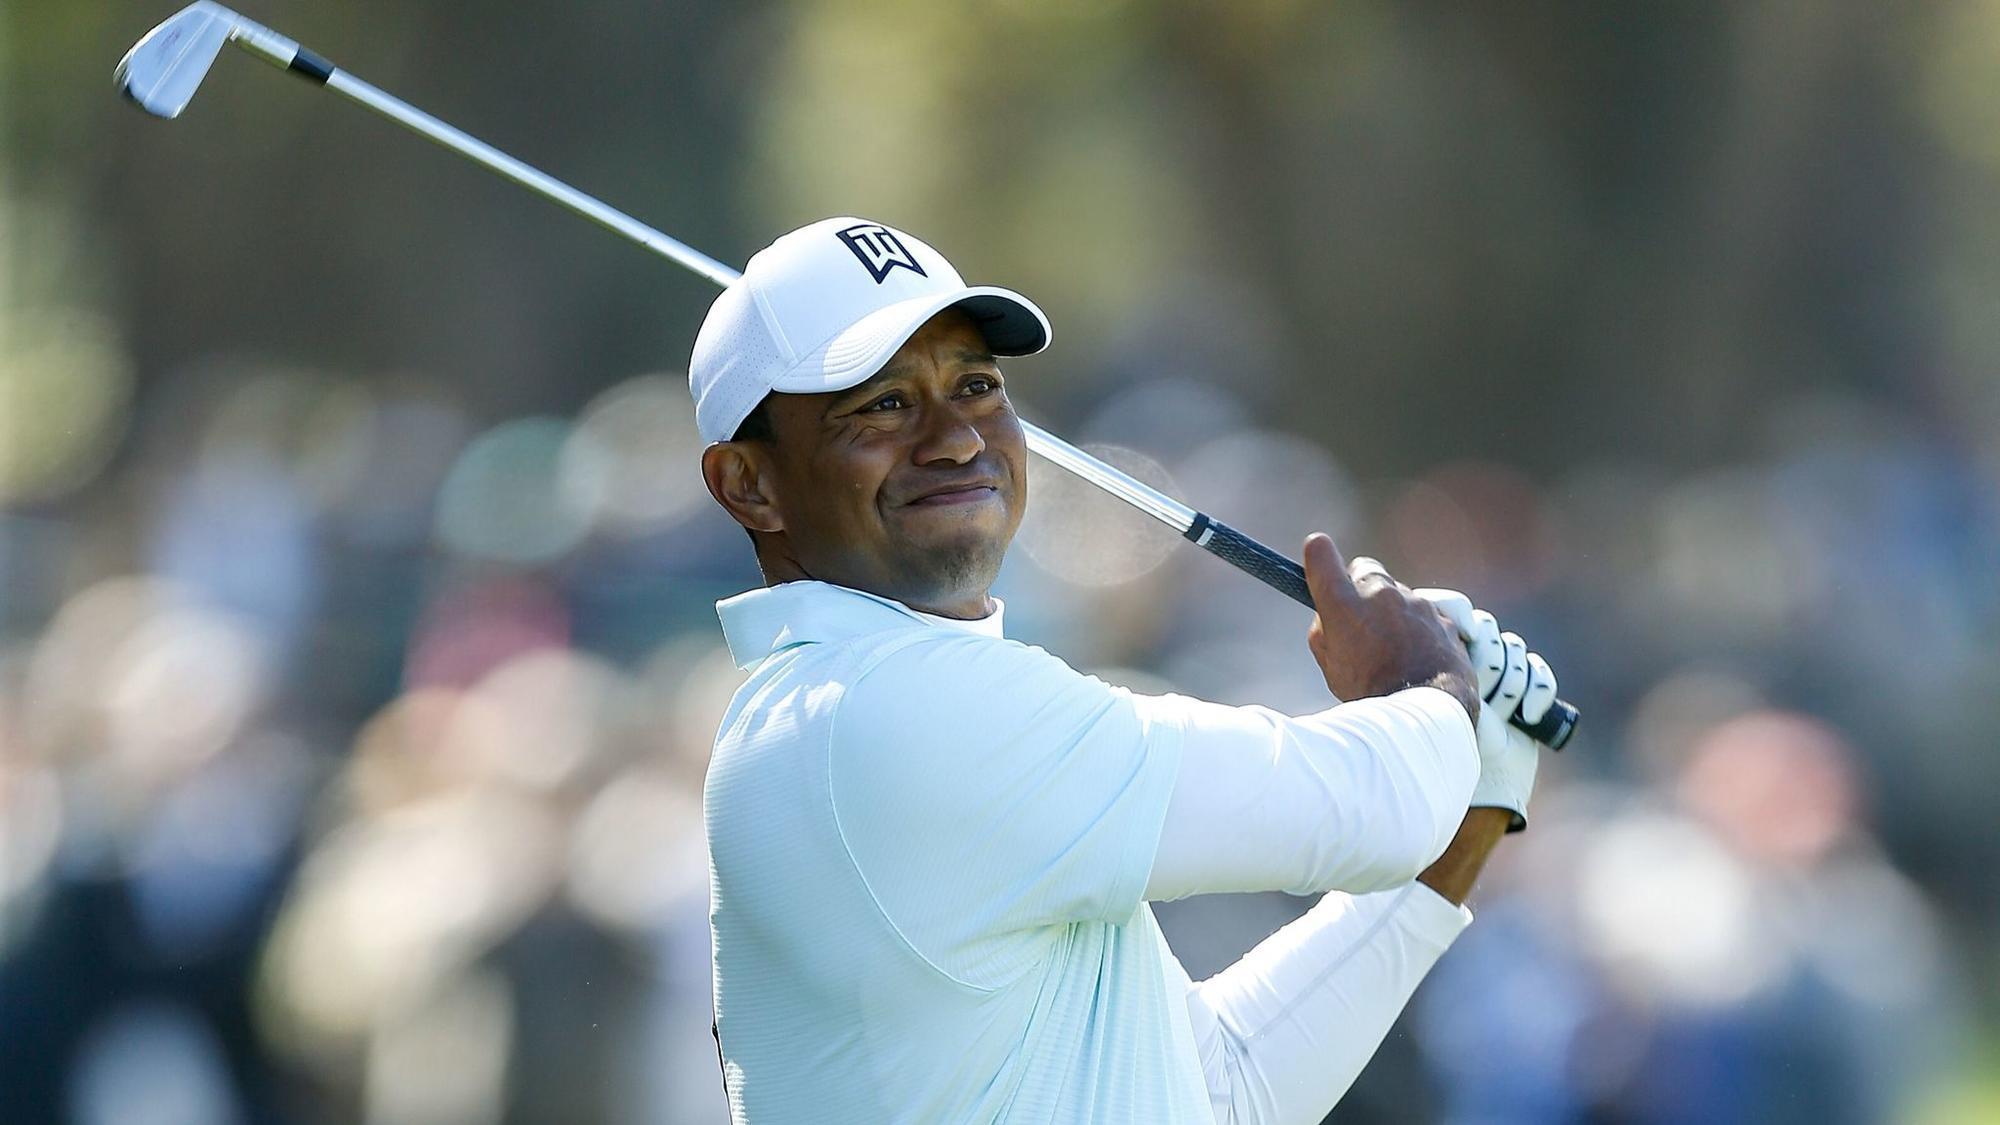 Tiger Woods surges to the top of a PGA Tour leaderboard for the first time since 2015 ...2000 x 1125